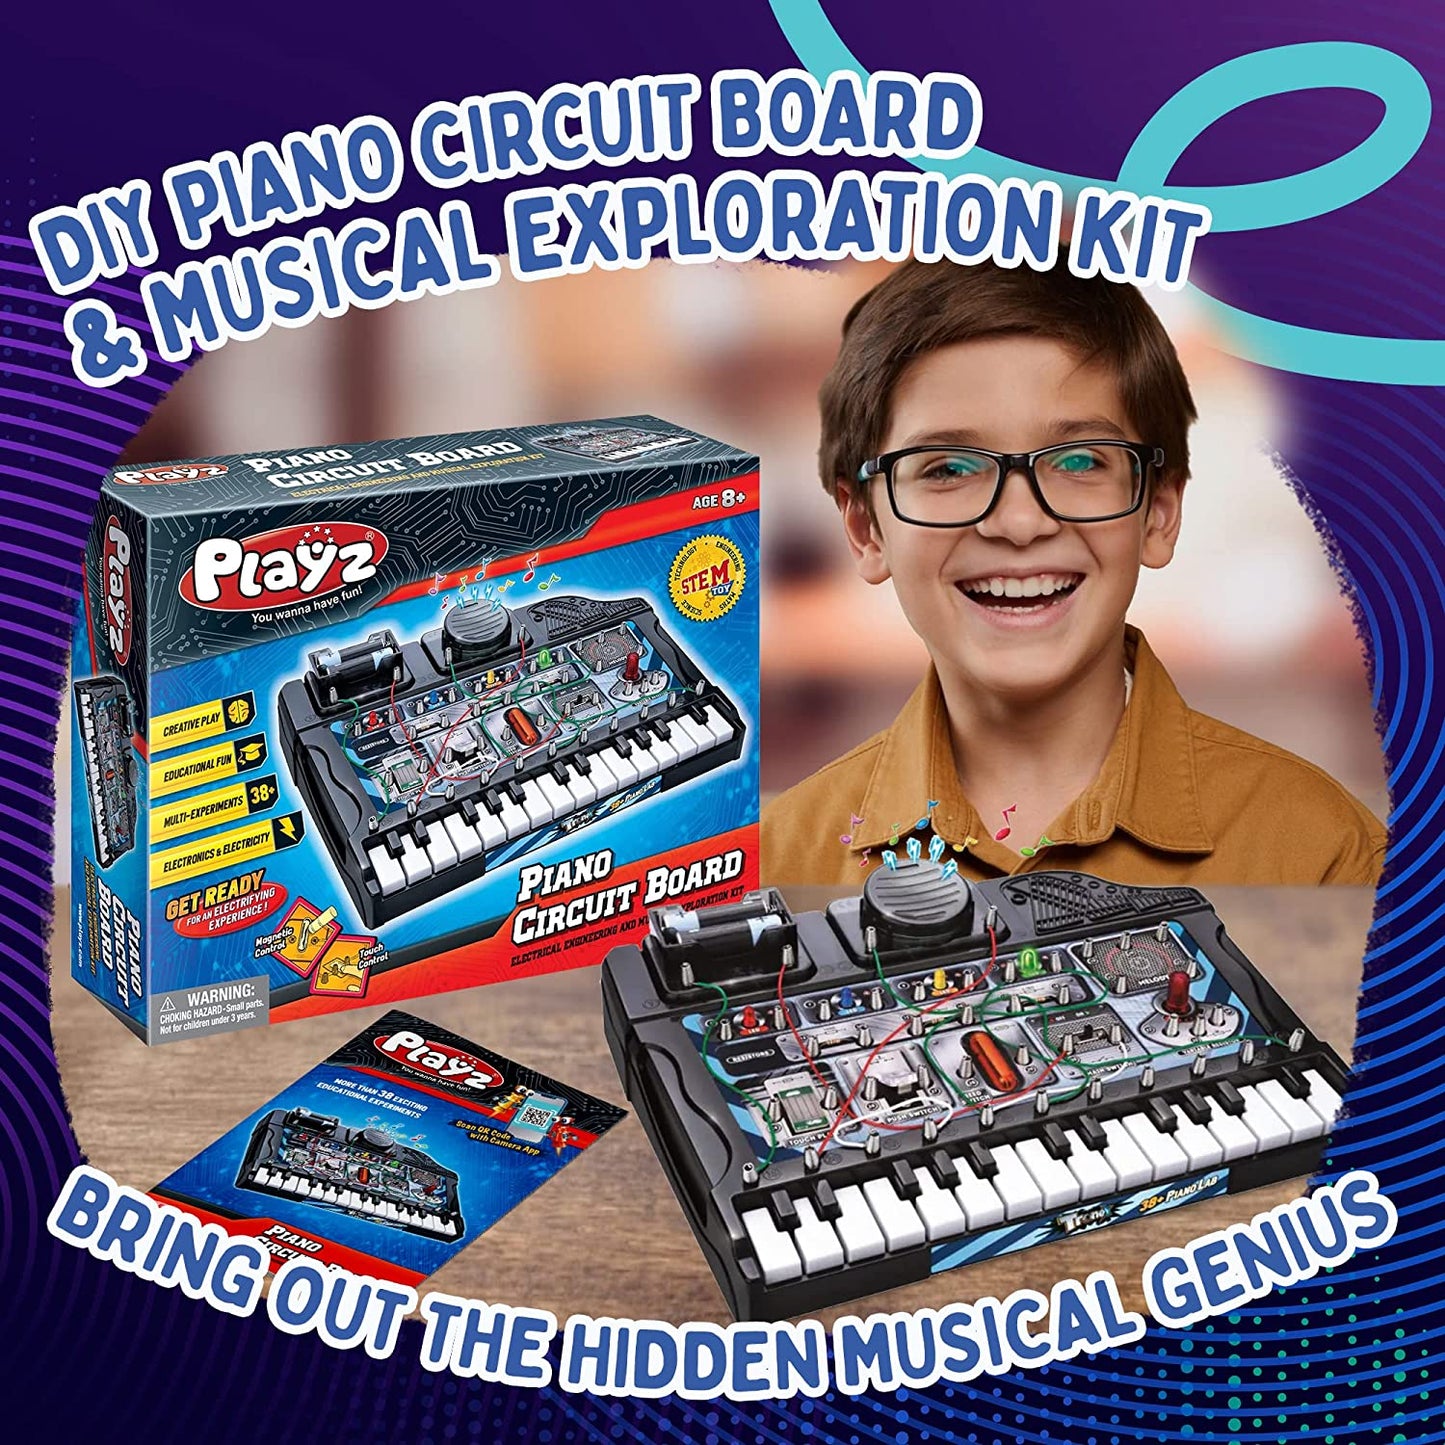 Electric Piano Circuit Board for Kids - 38+ Music Lab Experiments, Kids' Electronics Kit, DIY Engineering Toy & Educational Science Kits, & STEM Projects for Kids Ages 8-12, Teens, Boys, & Girls